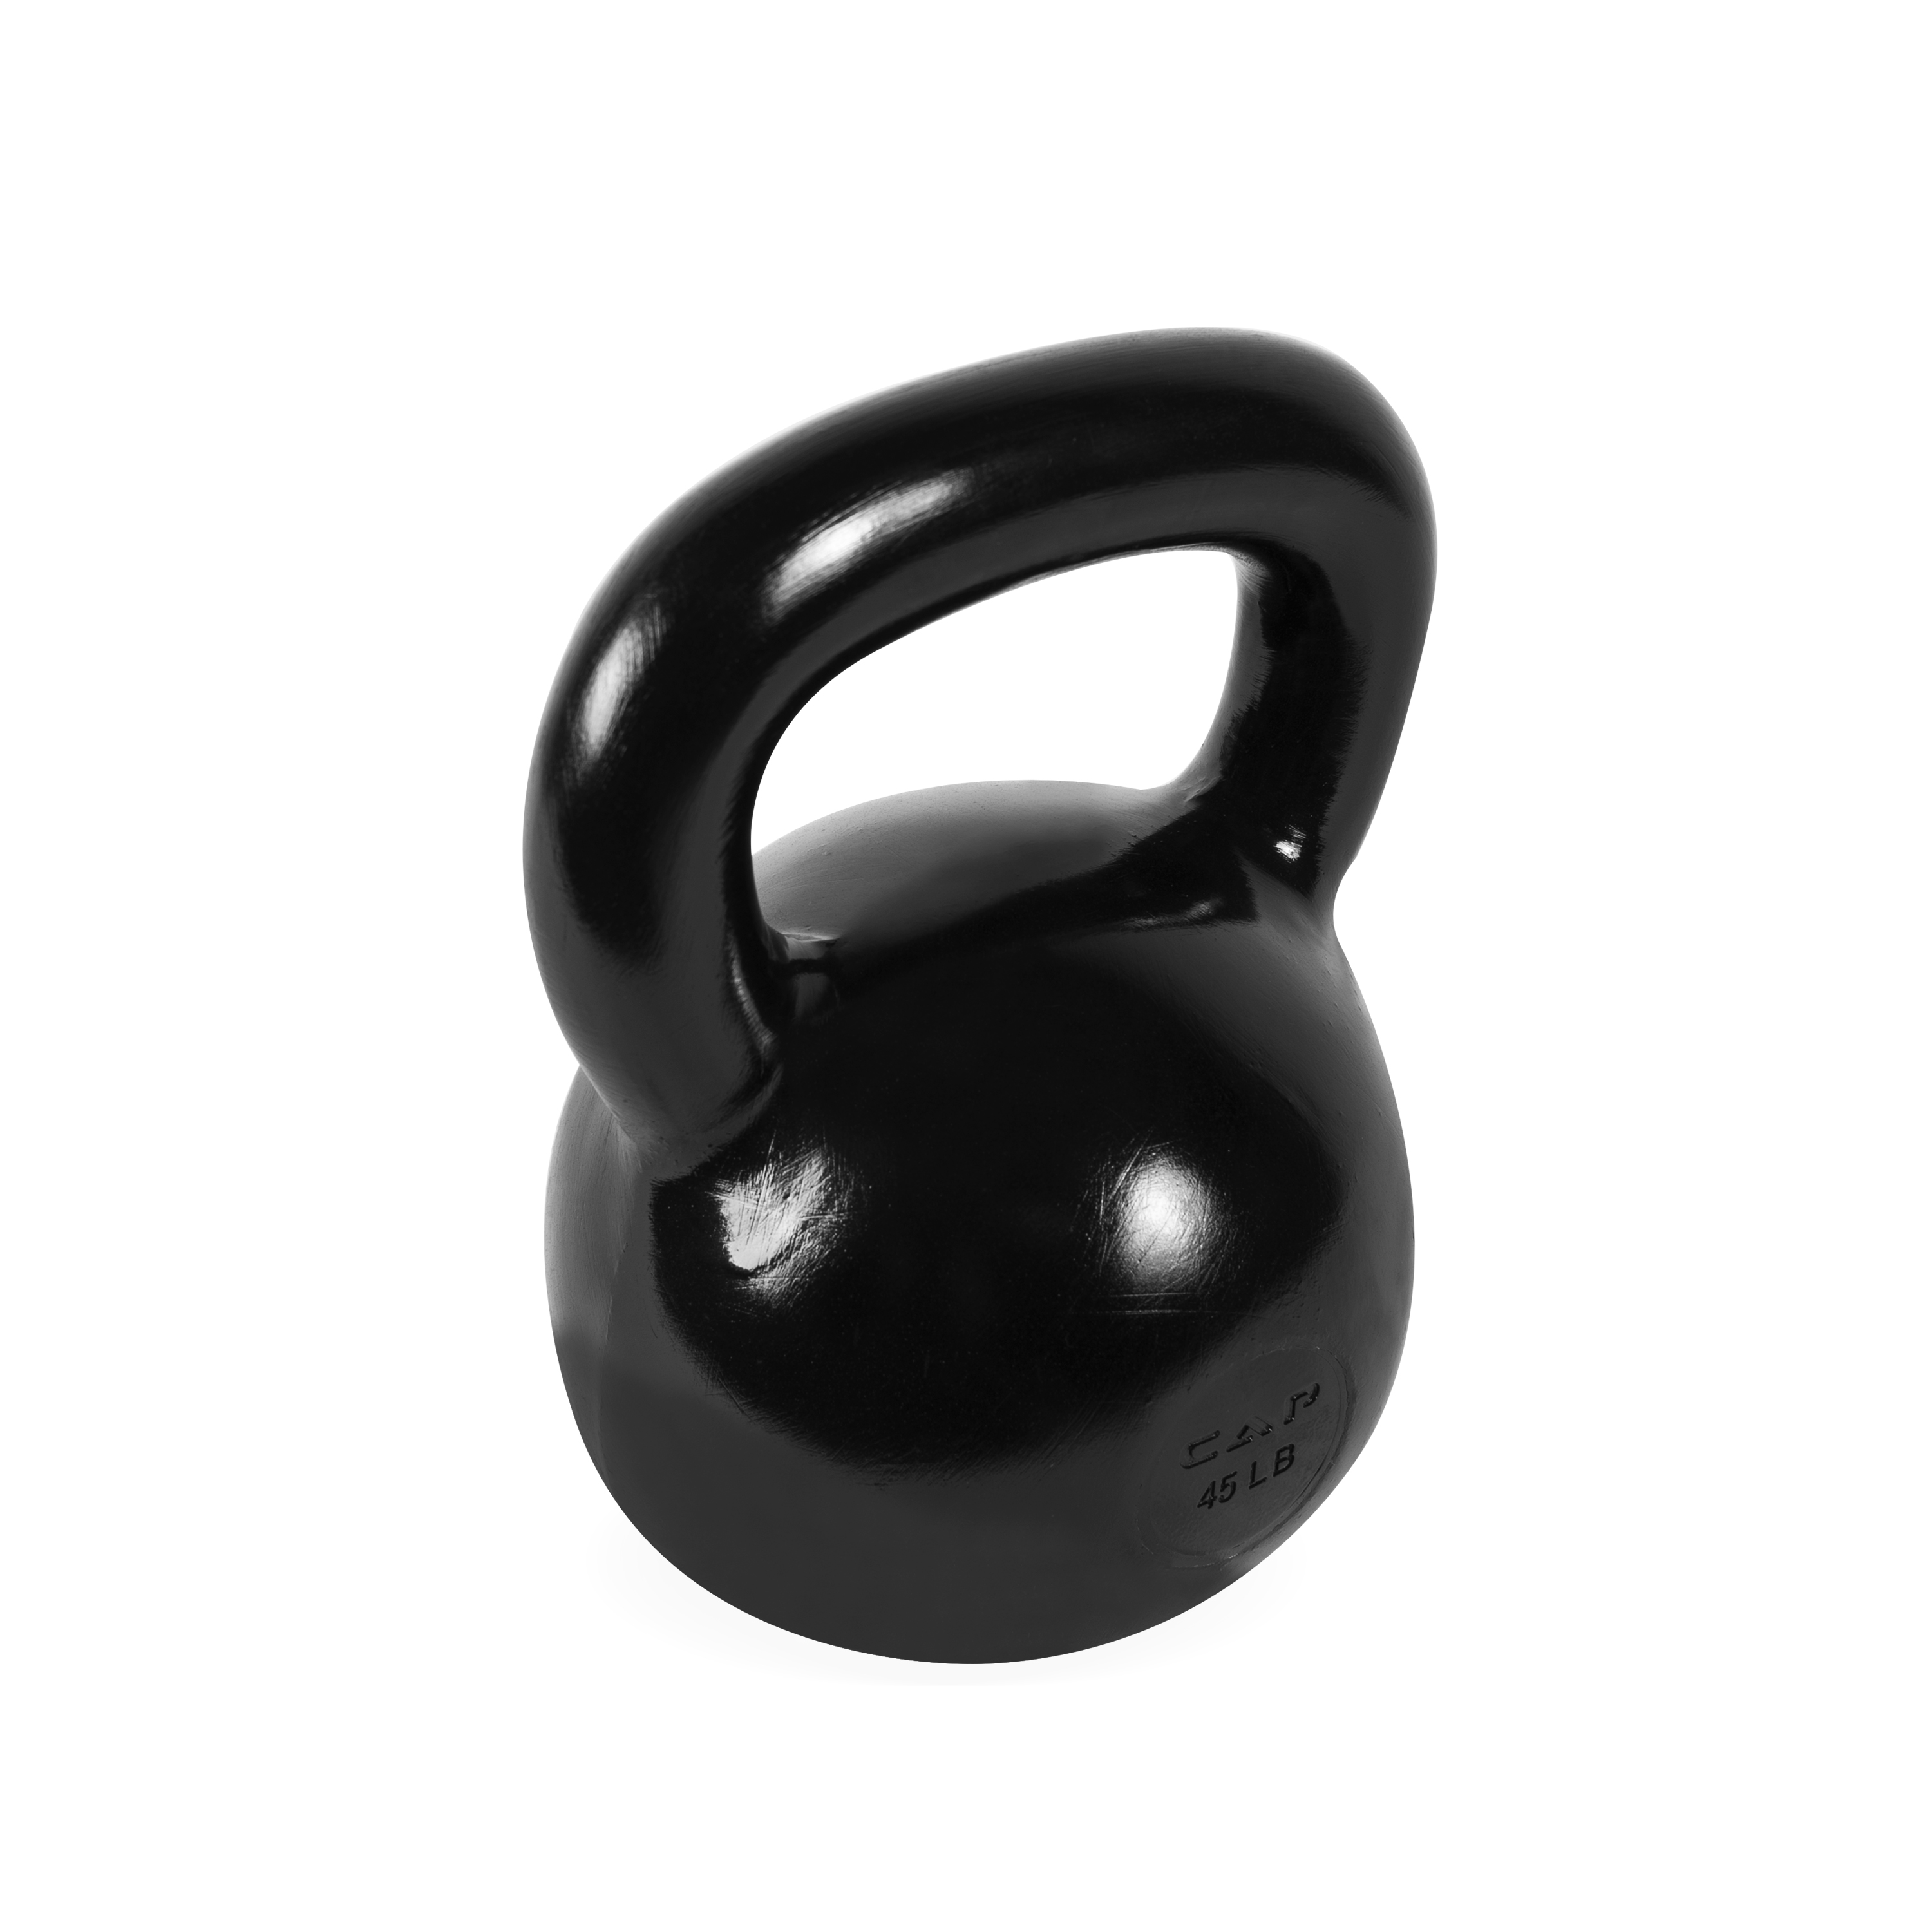 CAP Barbell Cast Iron Kettlebell, Black 45LBS - image 4 of 8